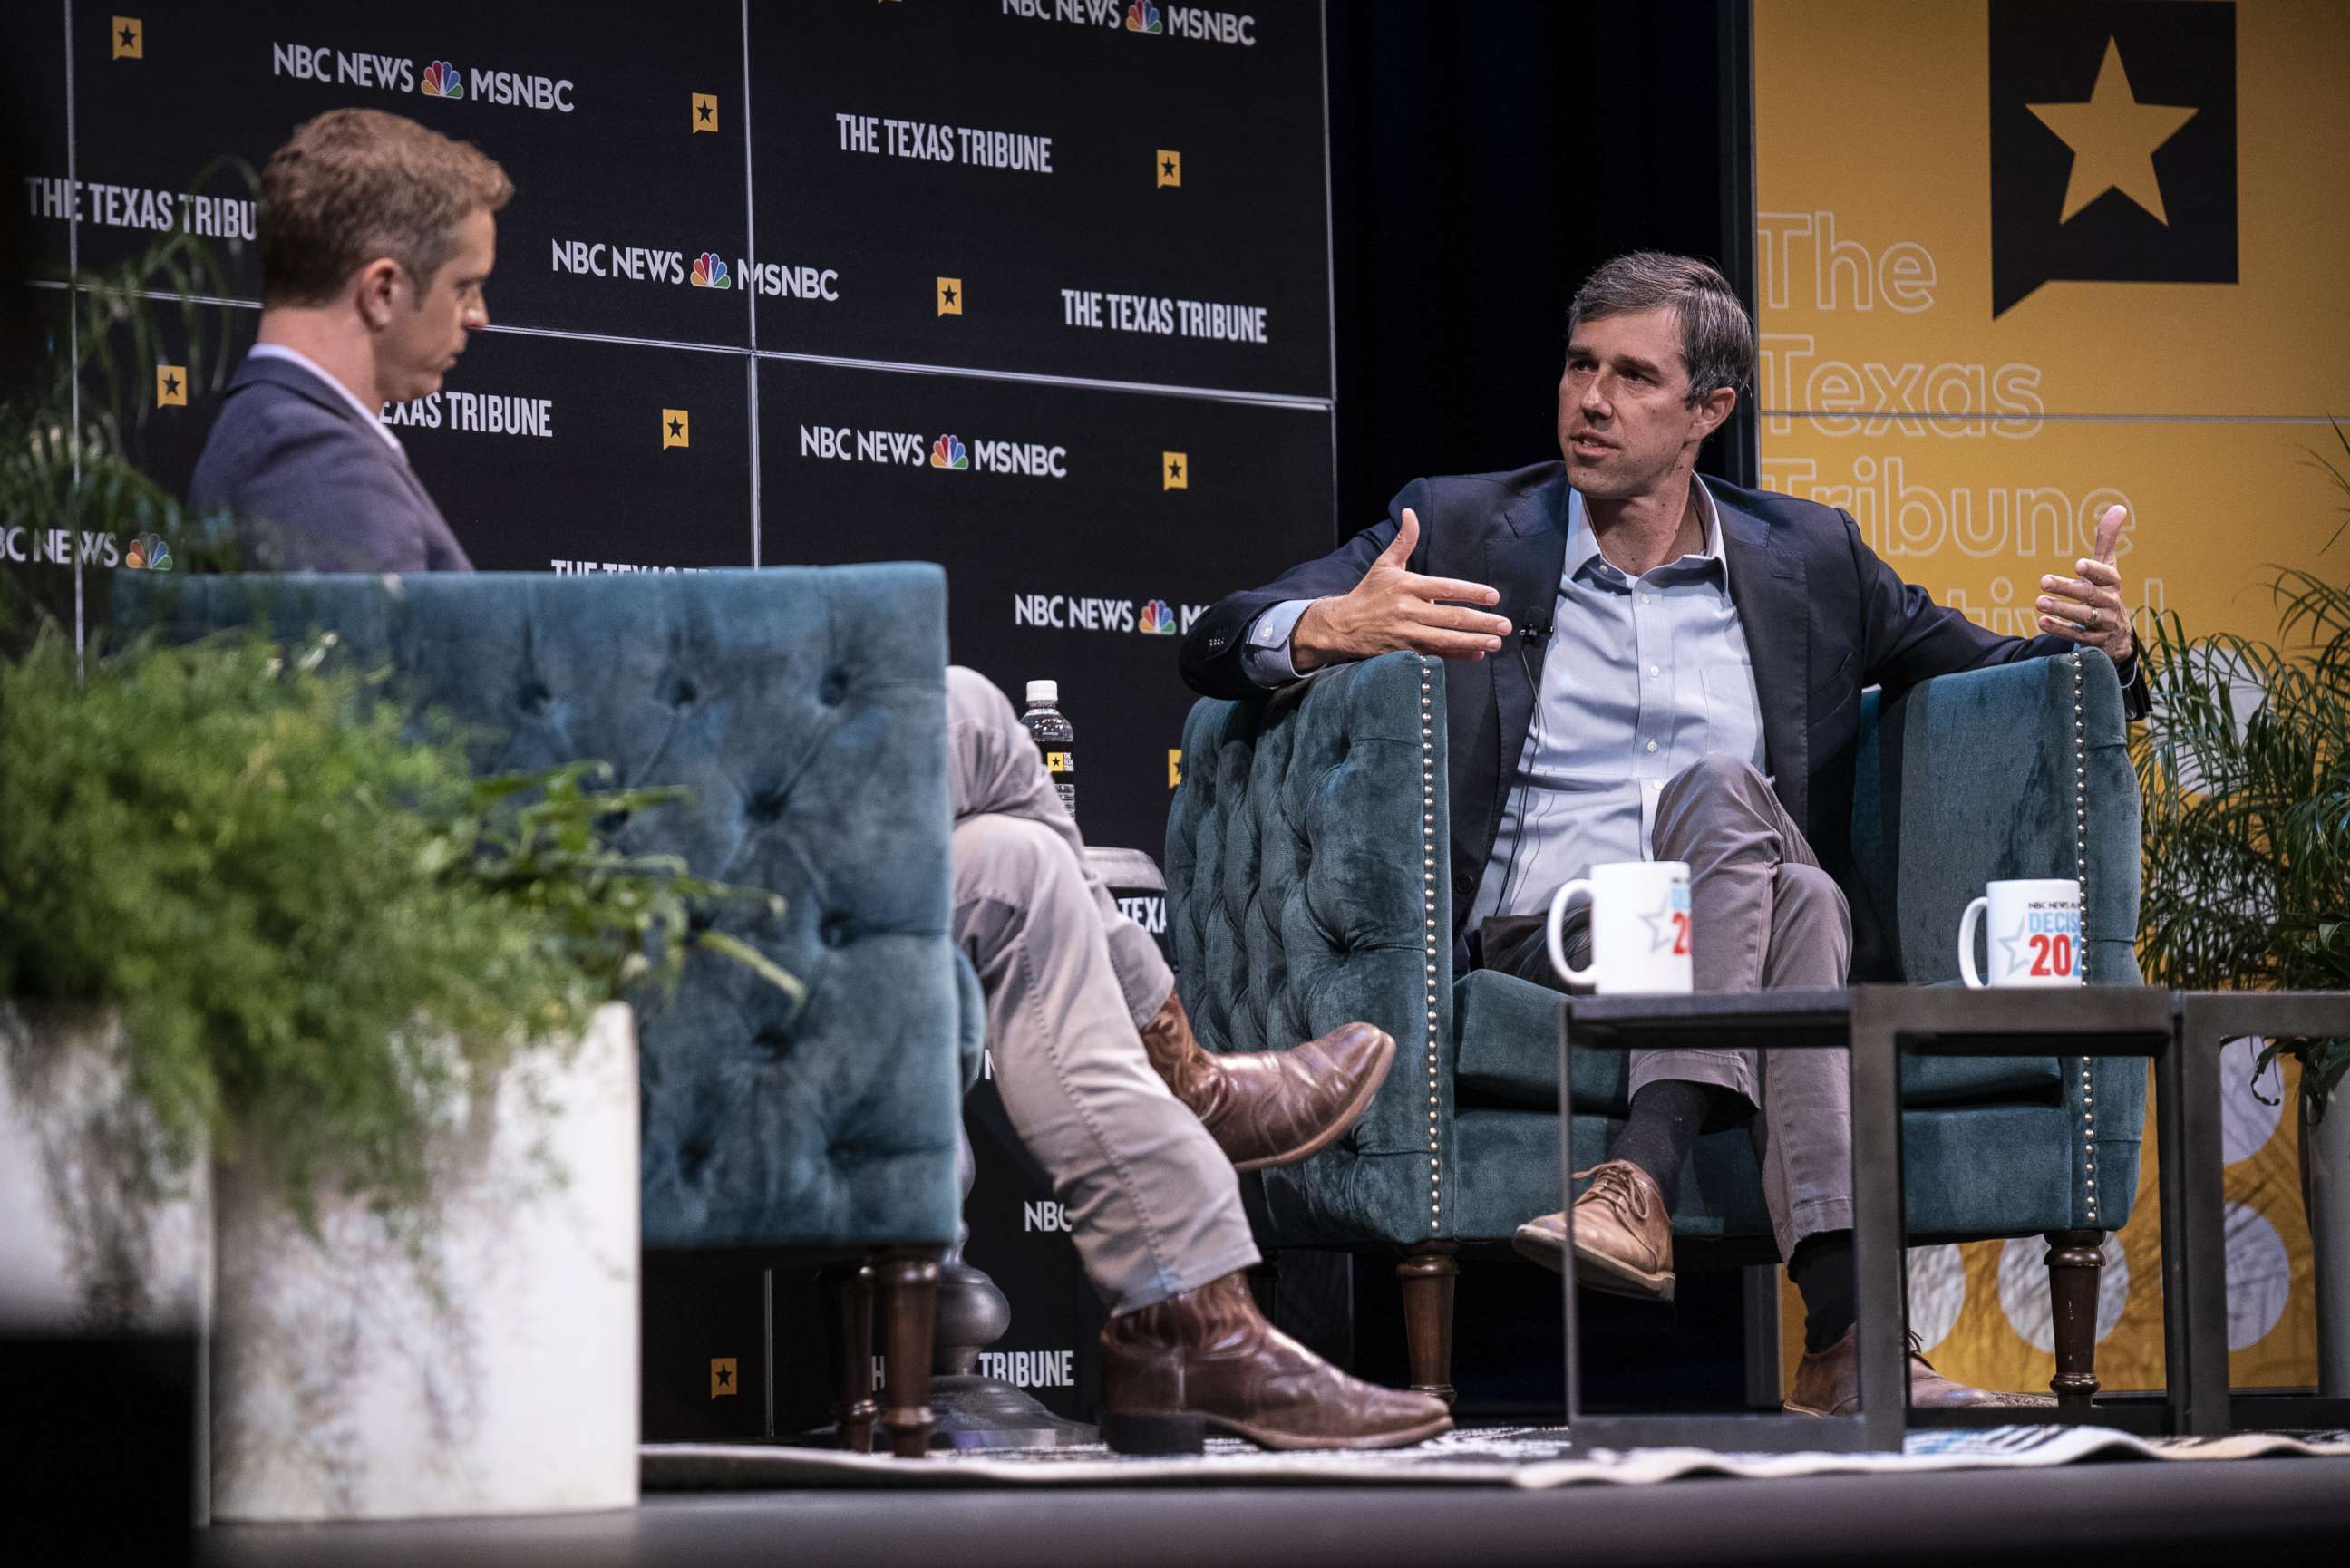 PHOTO: Democratic presidential candidate and former Rep. Beto O'Rourke speaks with Garrett Haake of MSNBC during a panel at The Texas Tribune Festival on Sept. 28, 2019 in Austin, Texas.